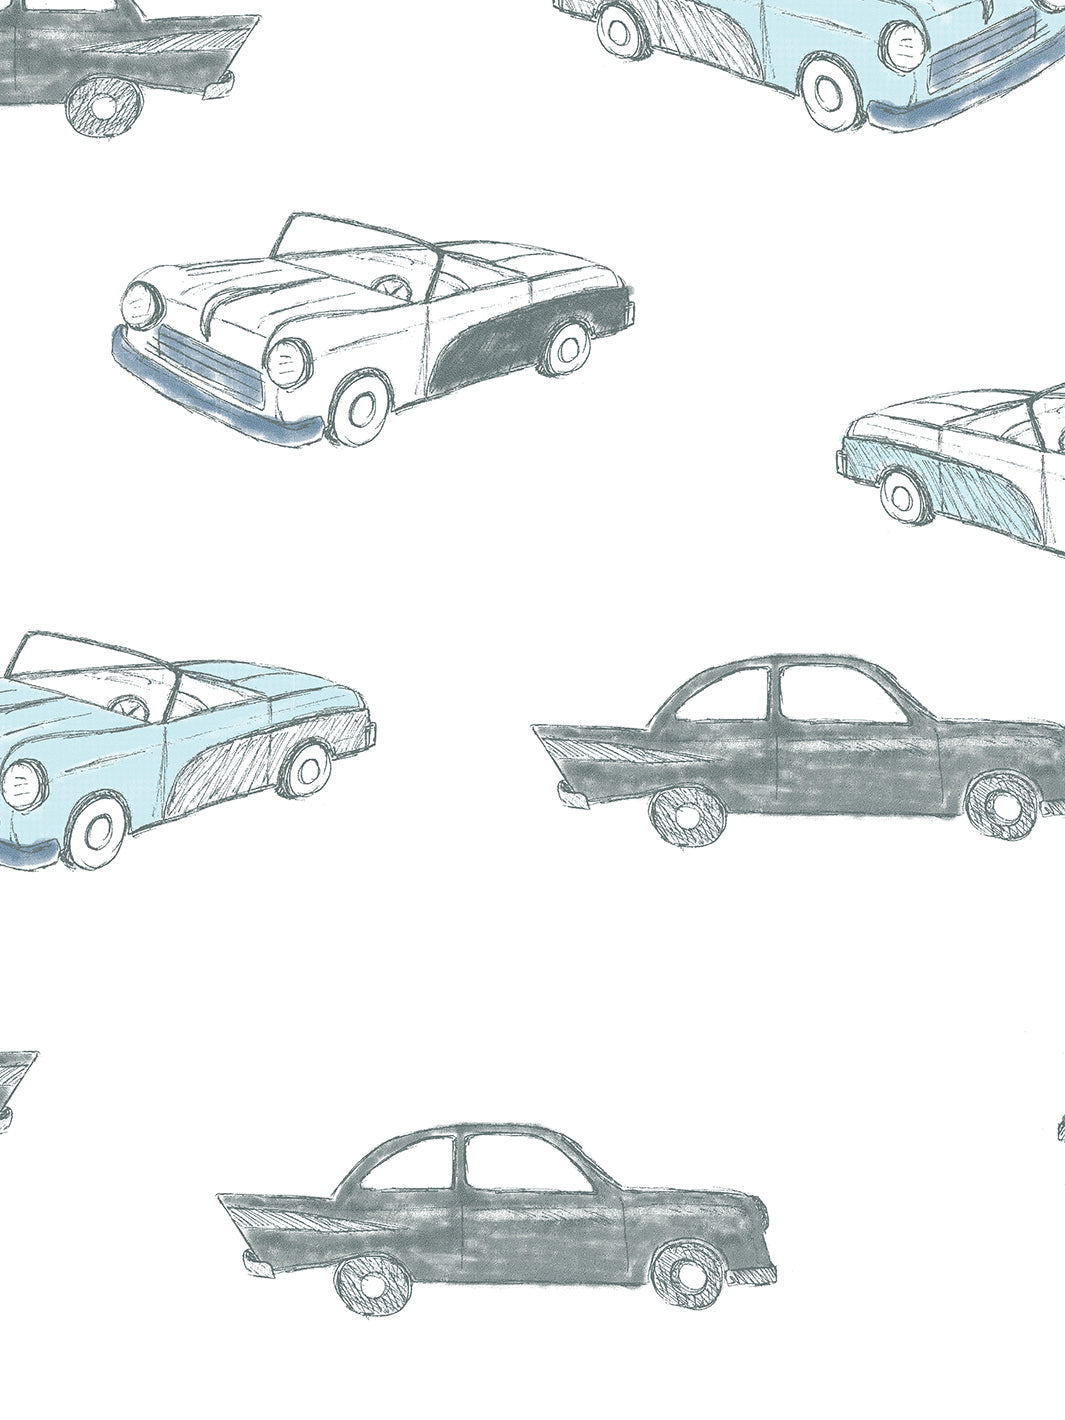 'Classic Cars' Wallpaper by Tea Collection - Blue